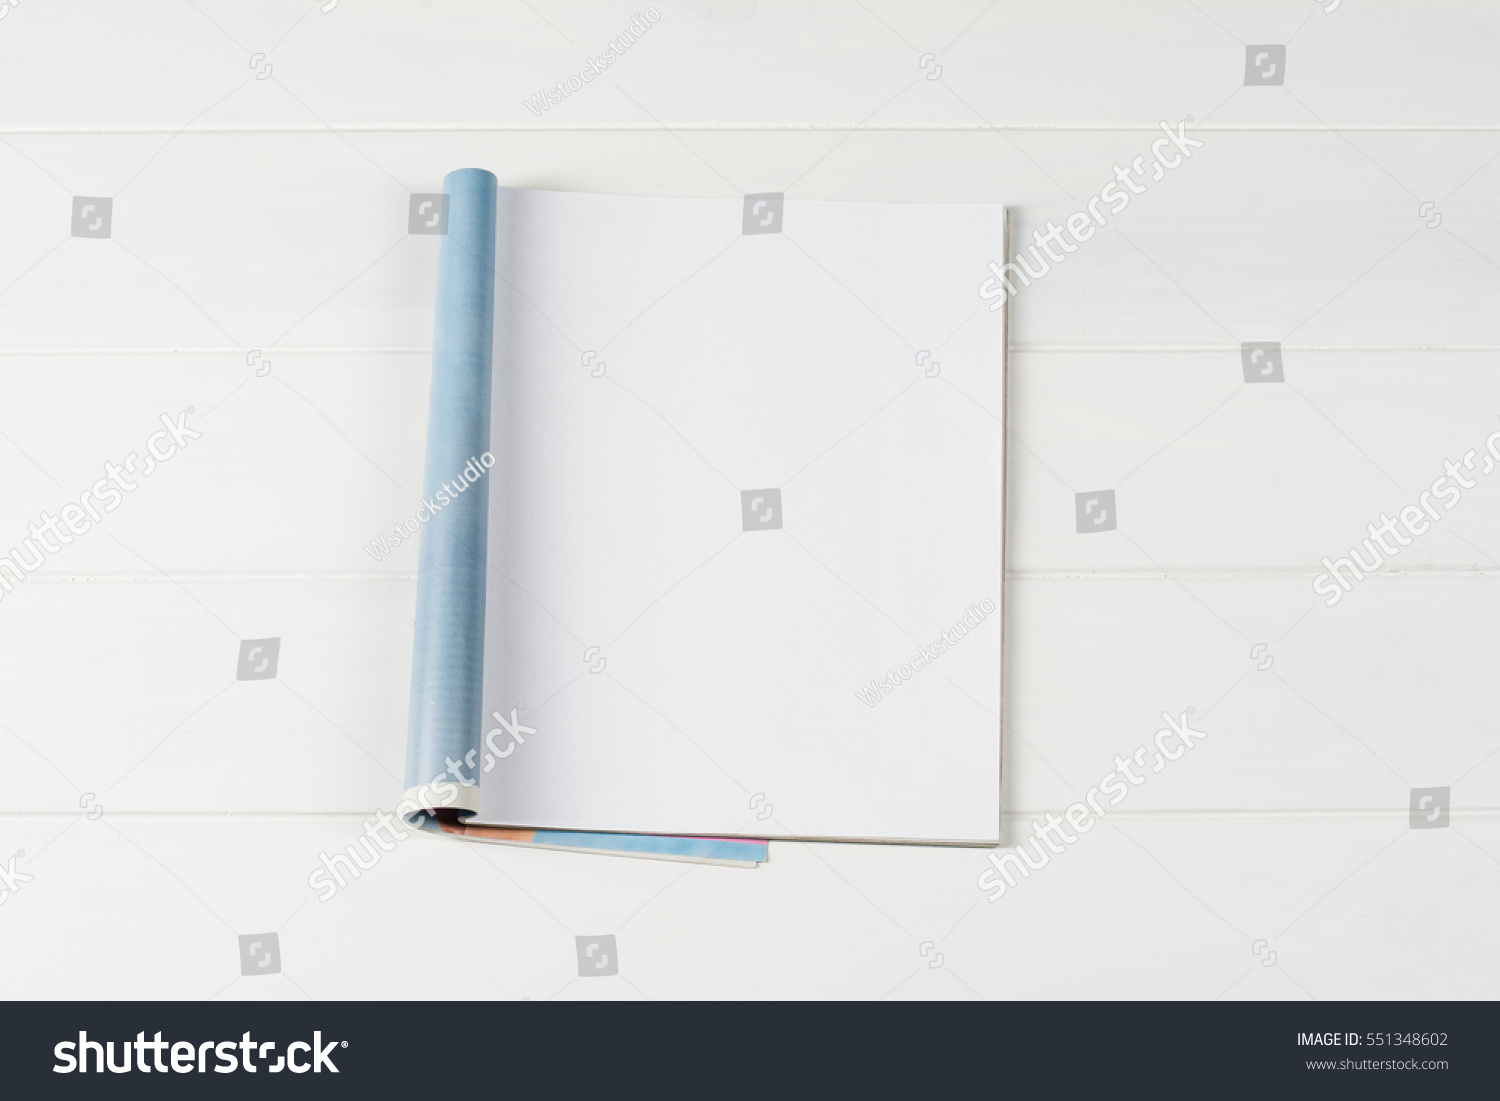 Mock-up magazine or catalog on wooden table. Blank page or notepad on wood background. Blank page or notepad for mockups or simulations. #551348602